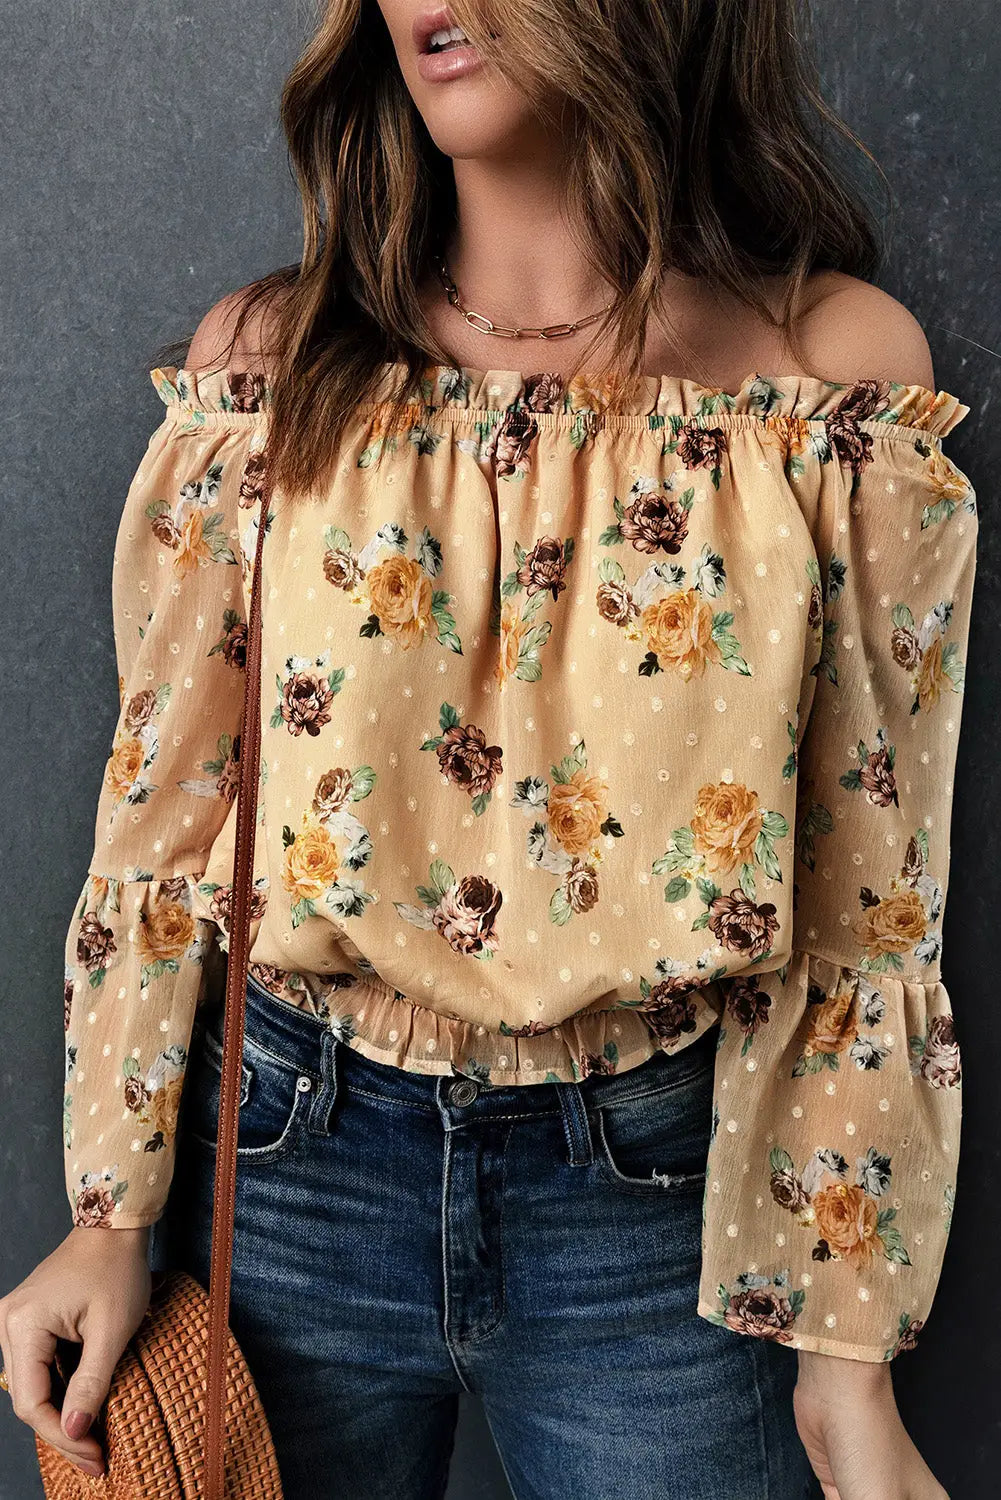 Yellow bell sleeves floral crop top - s / 100% polyester - tops